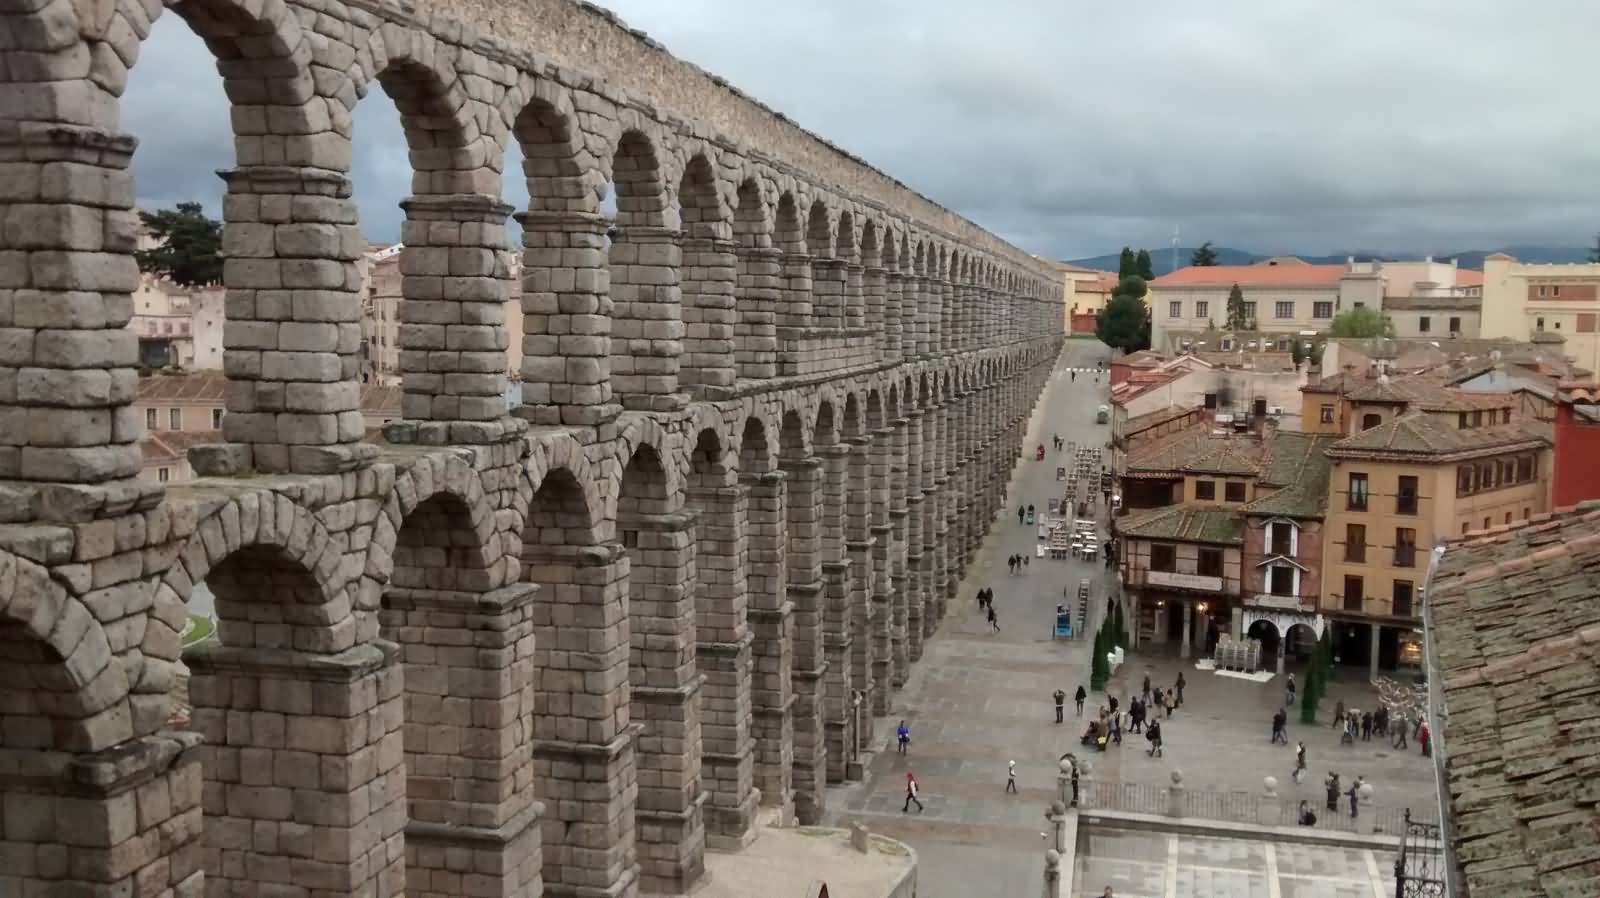 View Of Aqueduct Of Segovia From Stairs